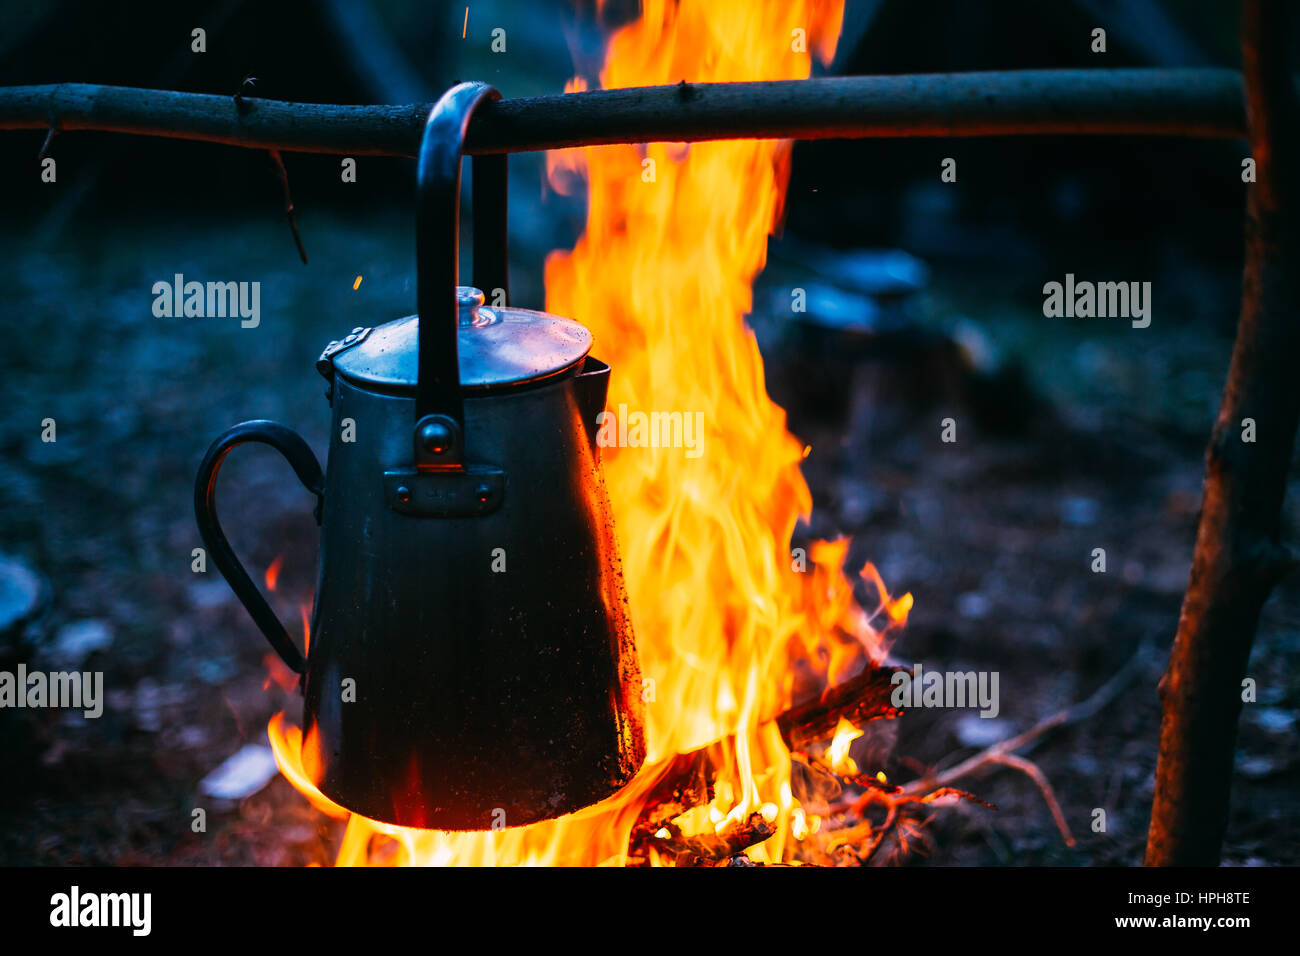 https://c8.alamy.com/comp/HPH8TE/old-retro-iron-camp-kettle-boils-water-on-a-fire-in-forest-bright-HPH8TE.jpg